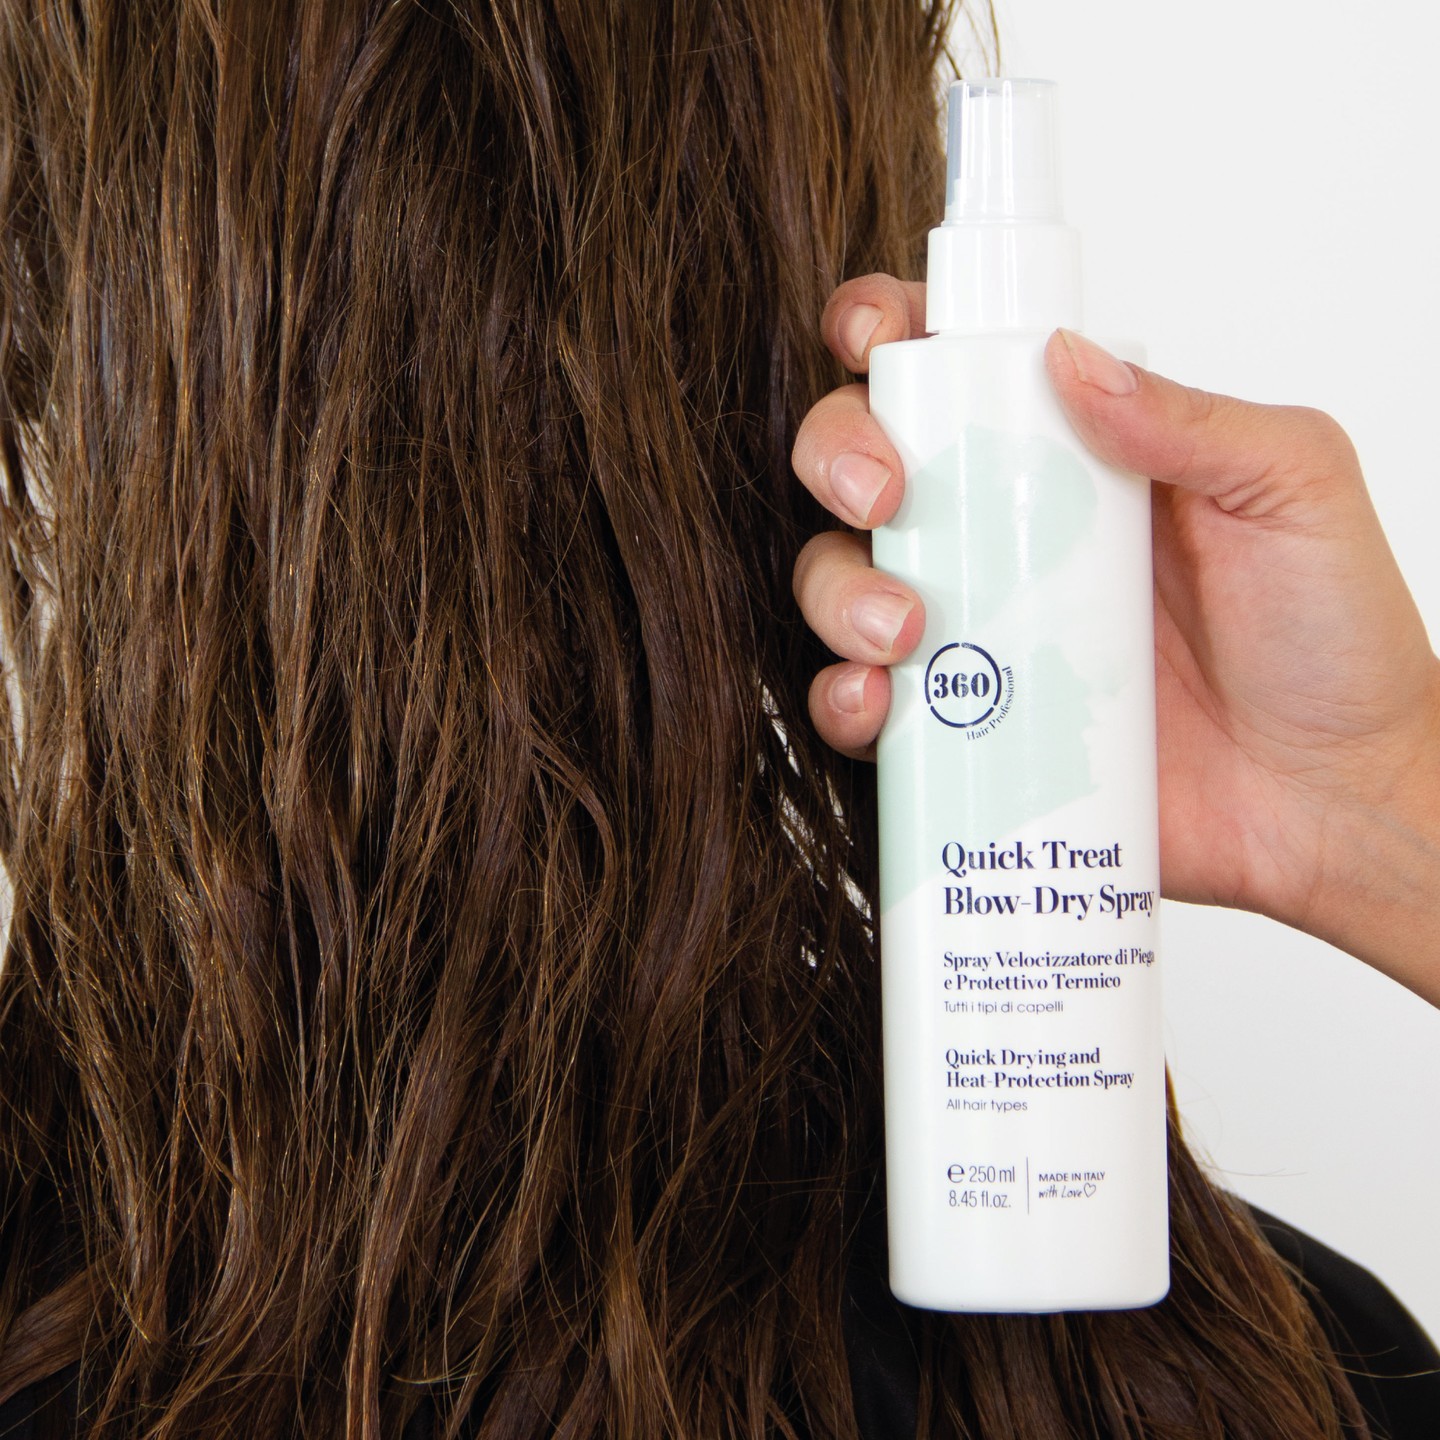 💚Treat your hair quickly and get heat protection with Quick Treat Spray!
.
.
.
💚Azione rapida e protezione dal calore sui tuoi capelli con Quick Treat Spray!

.
.
.
#360hair #360hairprofessional
#360hairproducts
#madeinitalywithlove